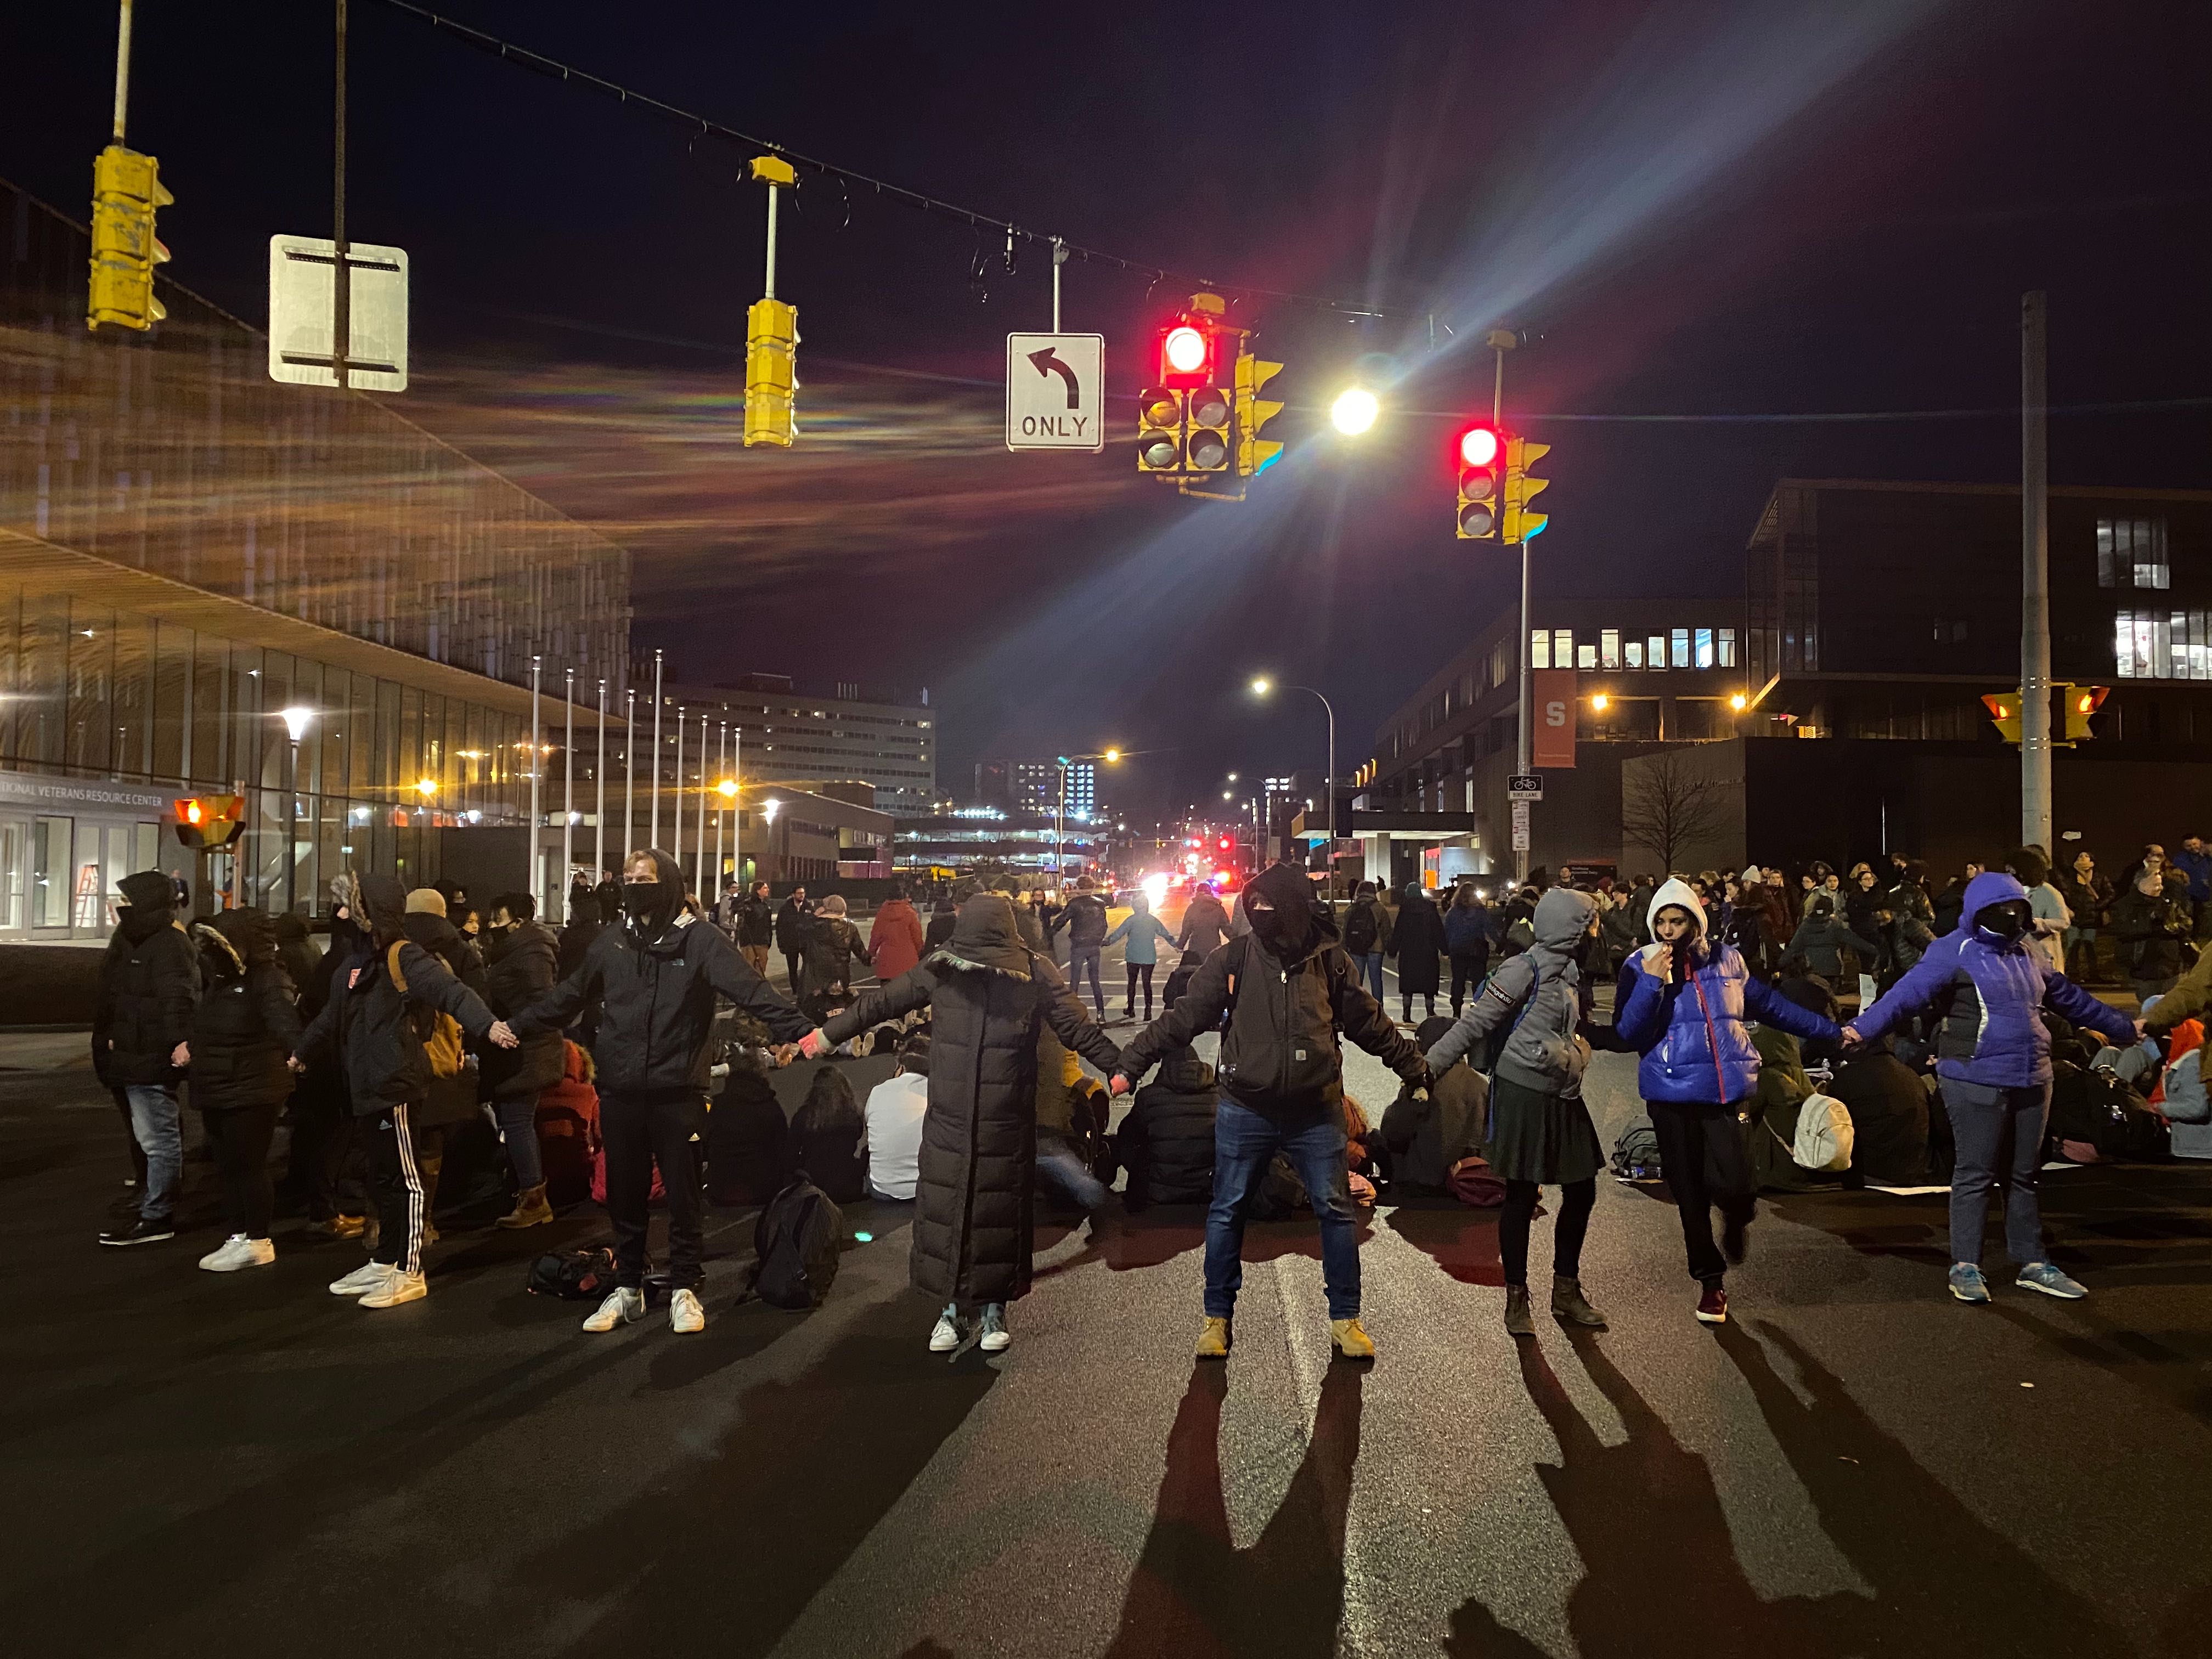 About 100 protestors blocked traffic along Waverly Ave. Wednesday night in an effort to call for negotiations with SU admins.